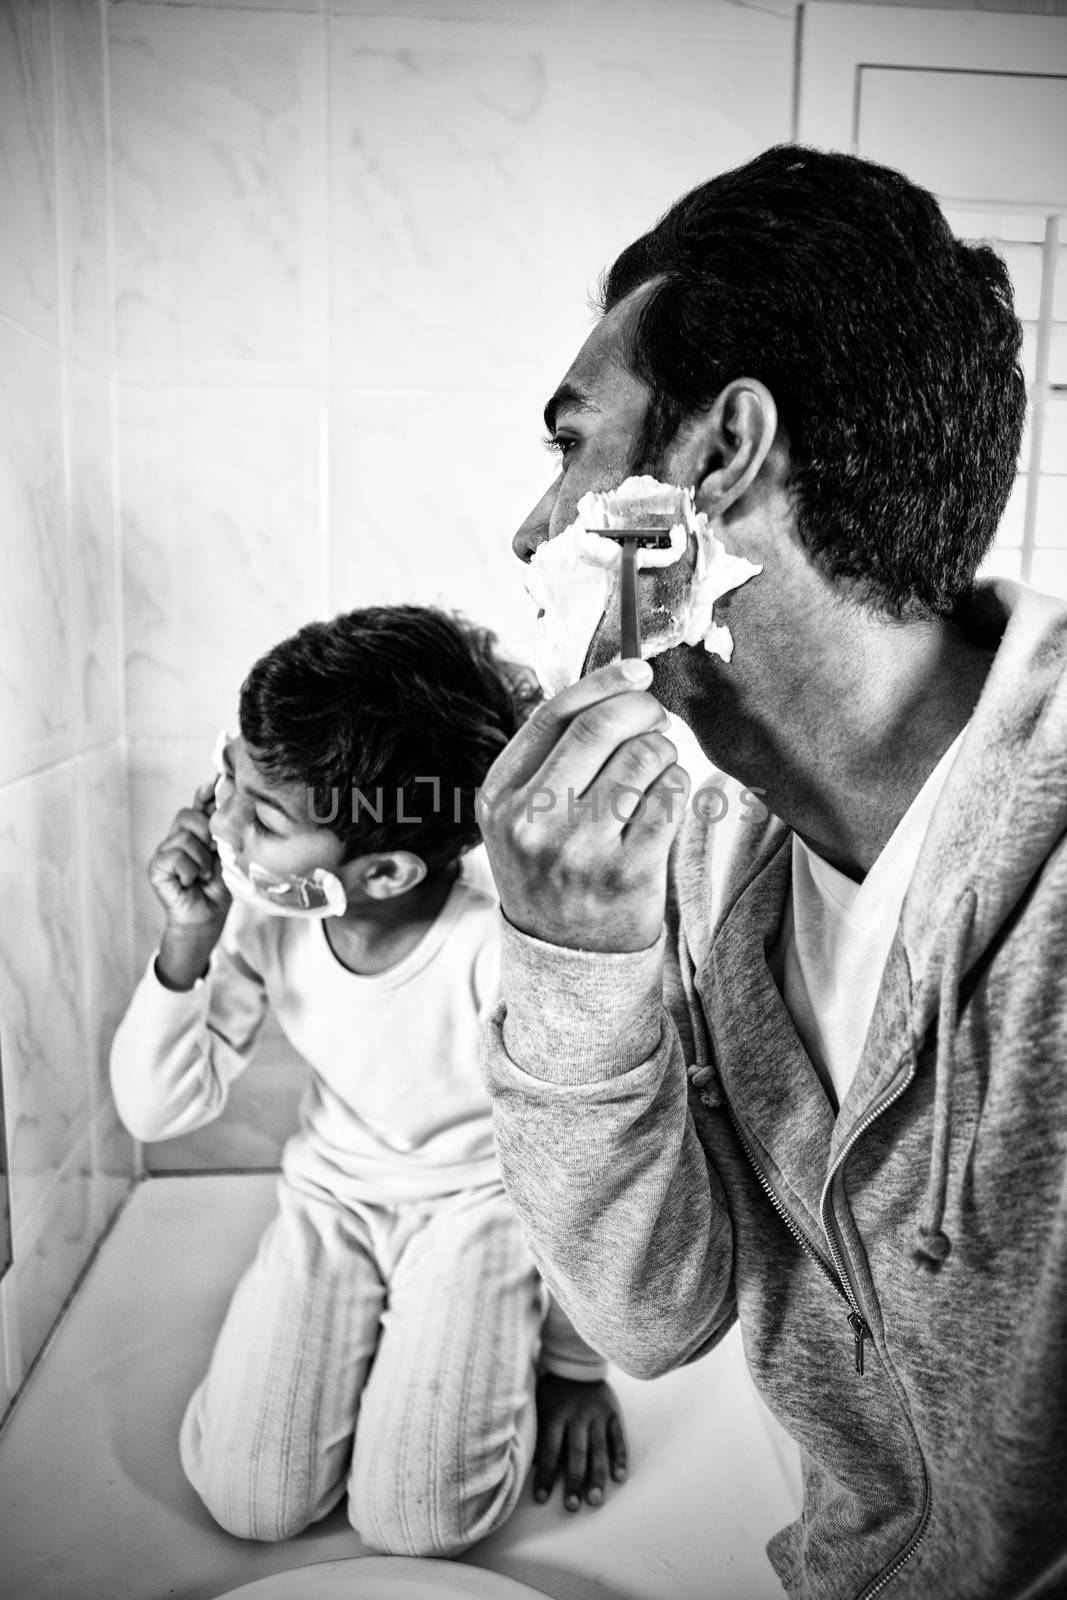 Father and son shaving together in the bathroom at home